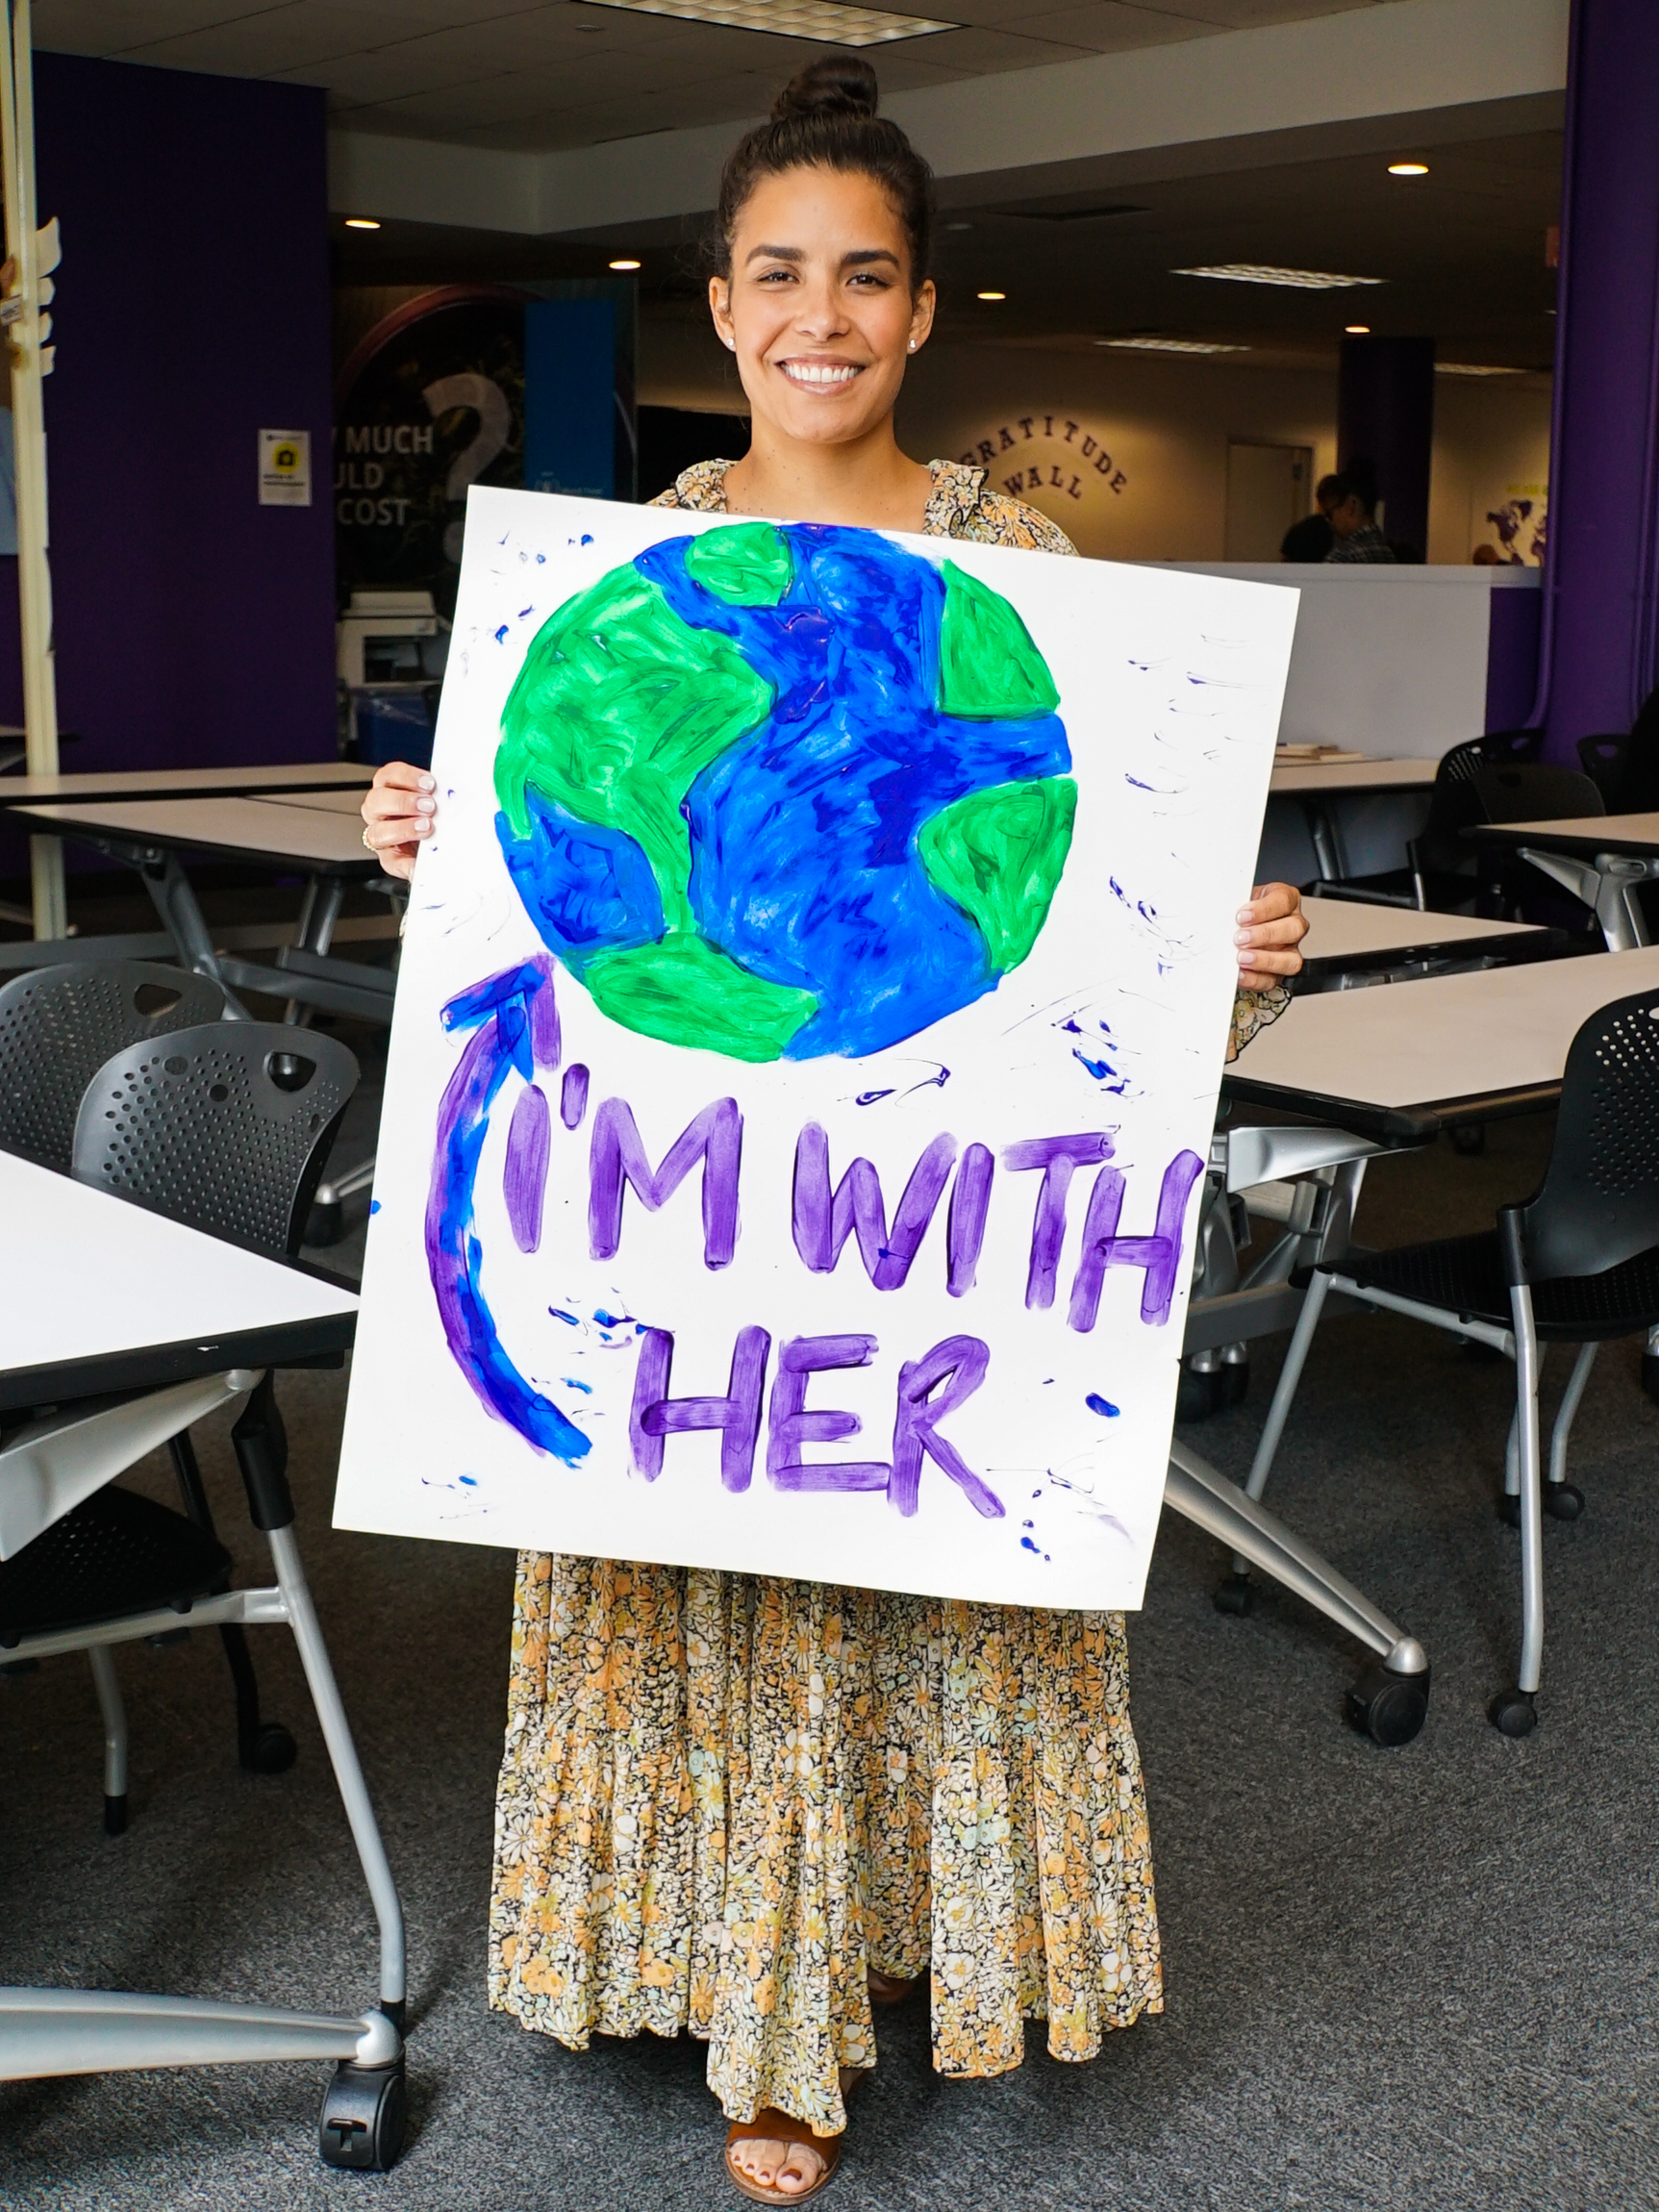 Student holding "I'm With Her" poster